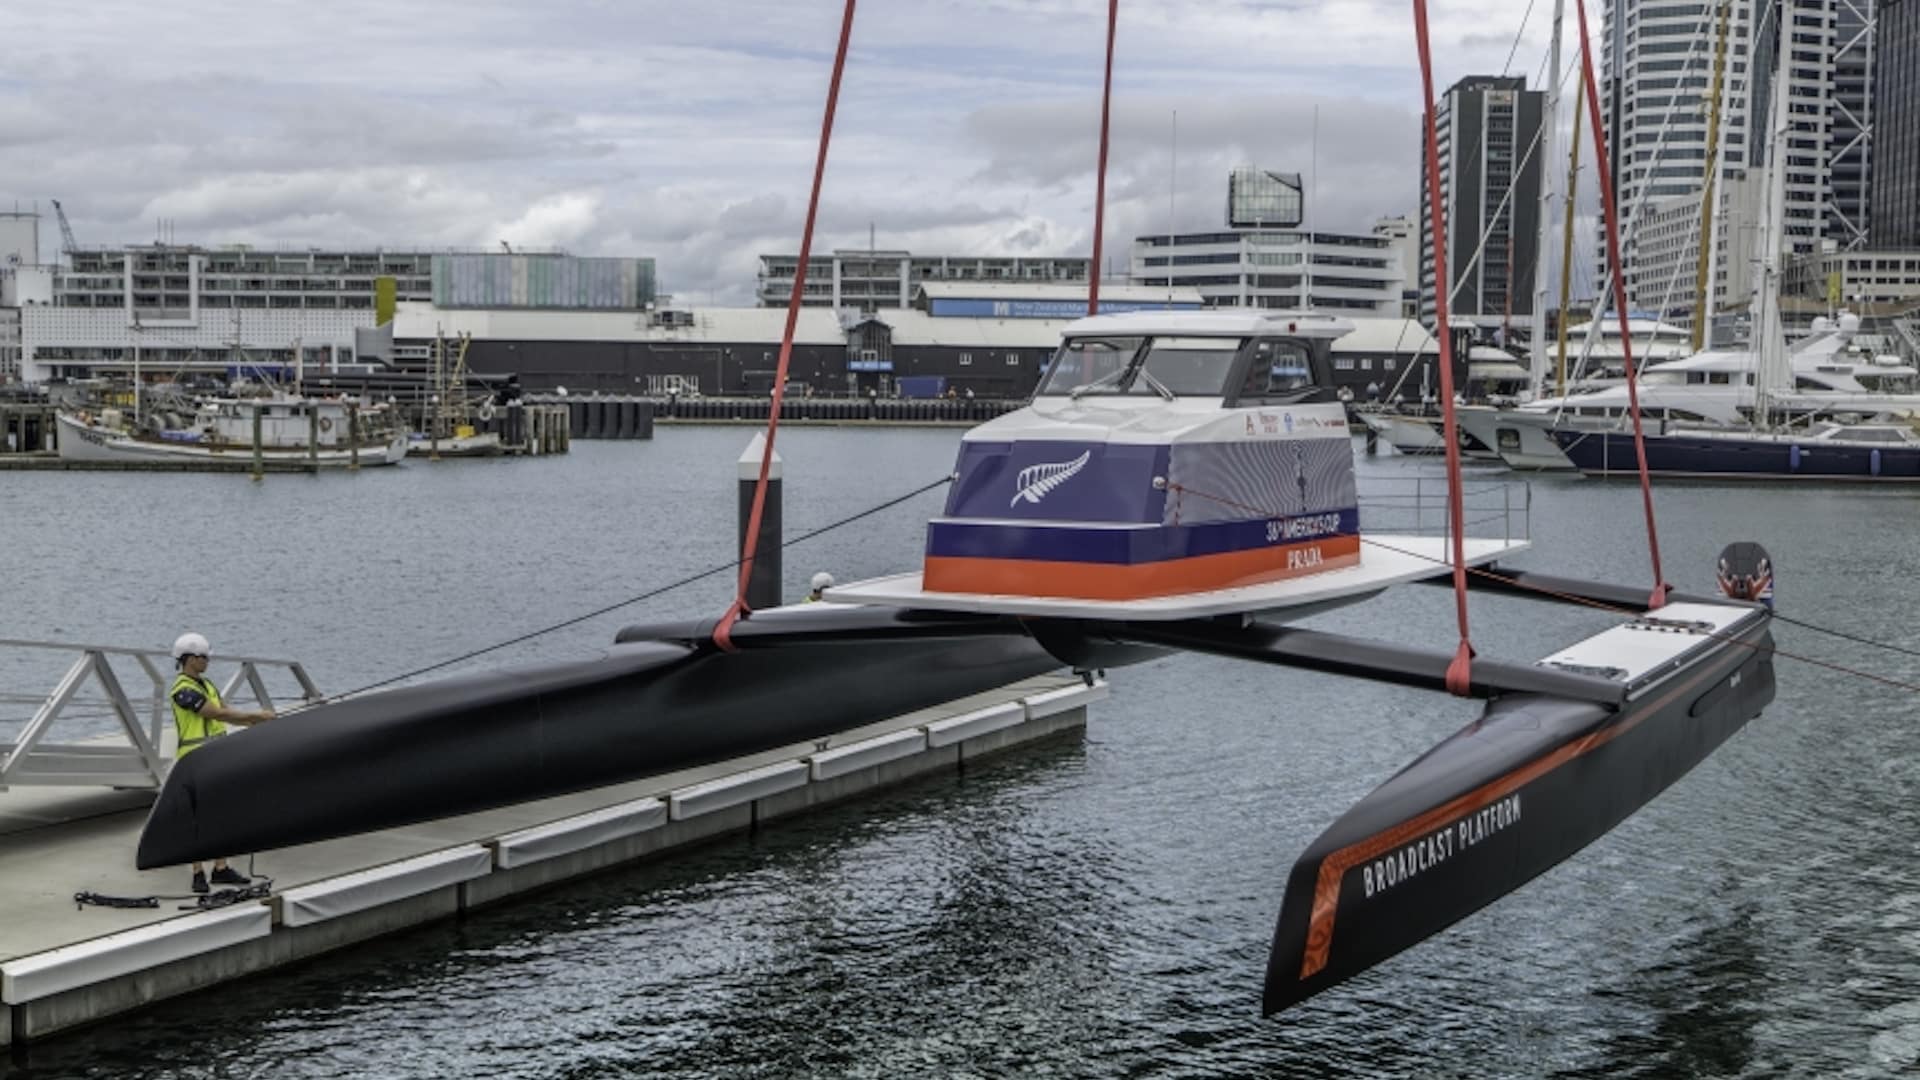 Emirates Team New Zealand’s launch ‘Te Kāhu’ test boat in Auckland